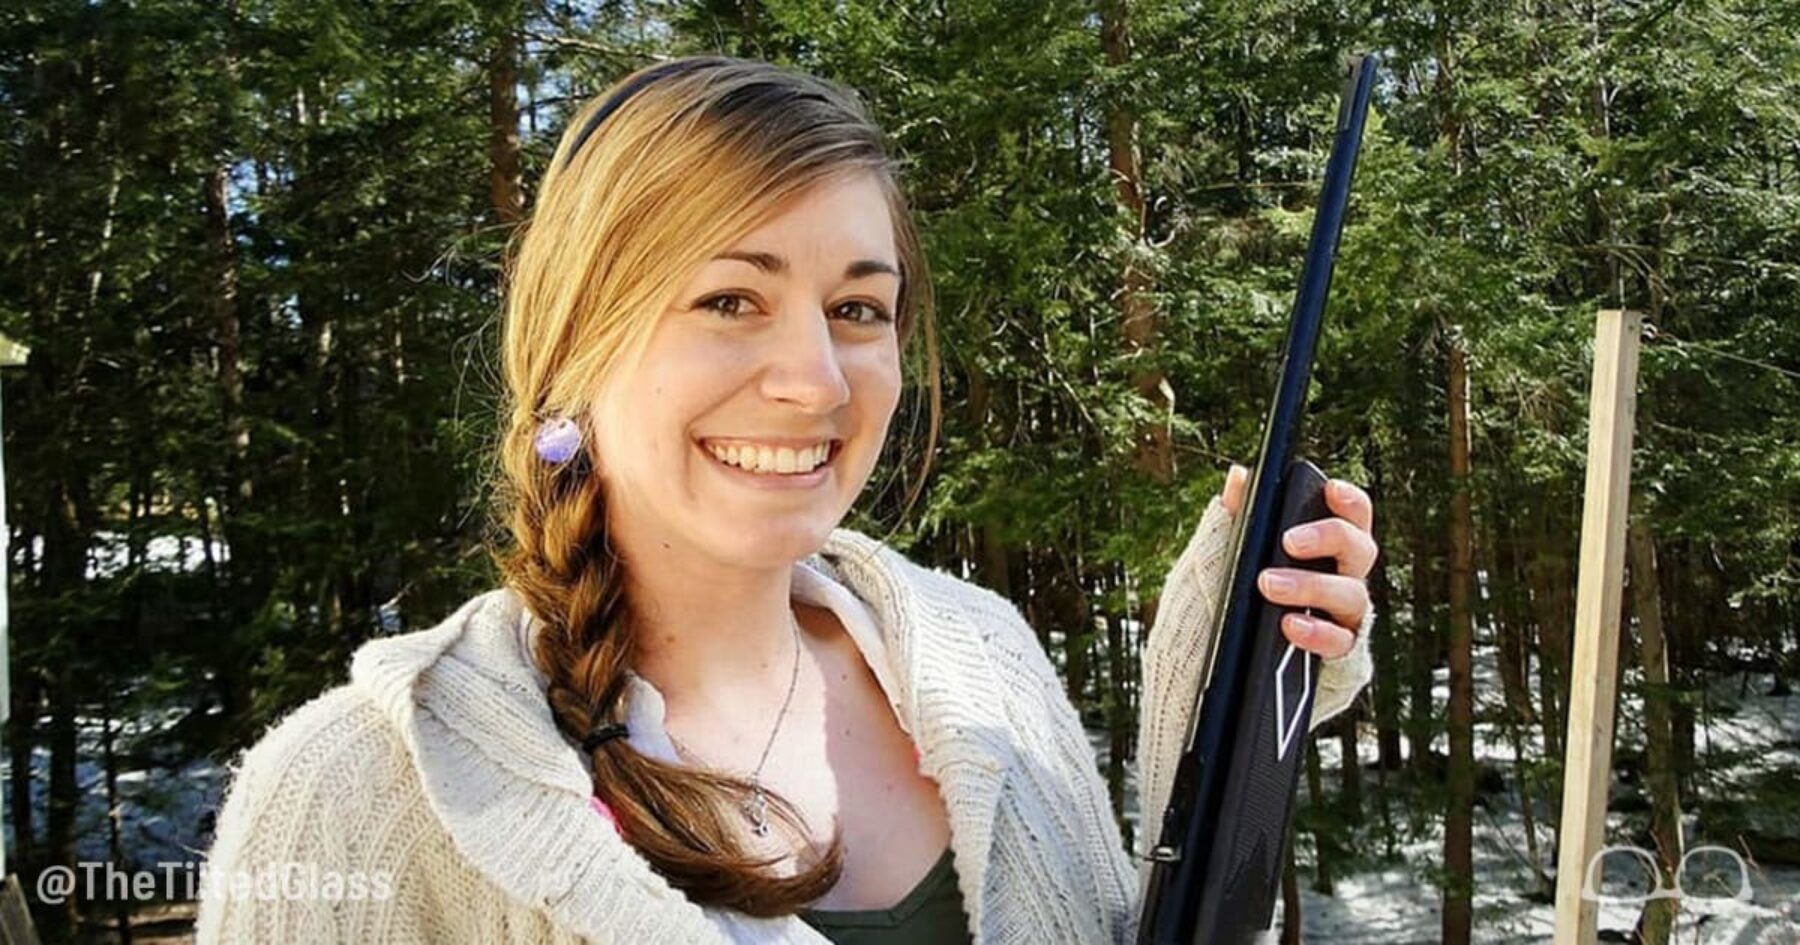 NRA Responds With Photos of Sexy Women With Guns [SFW]